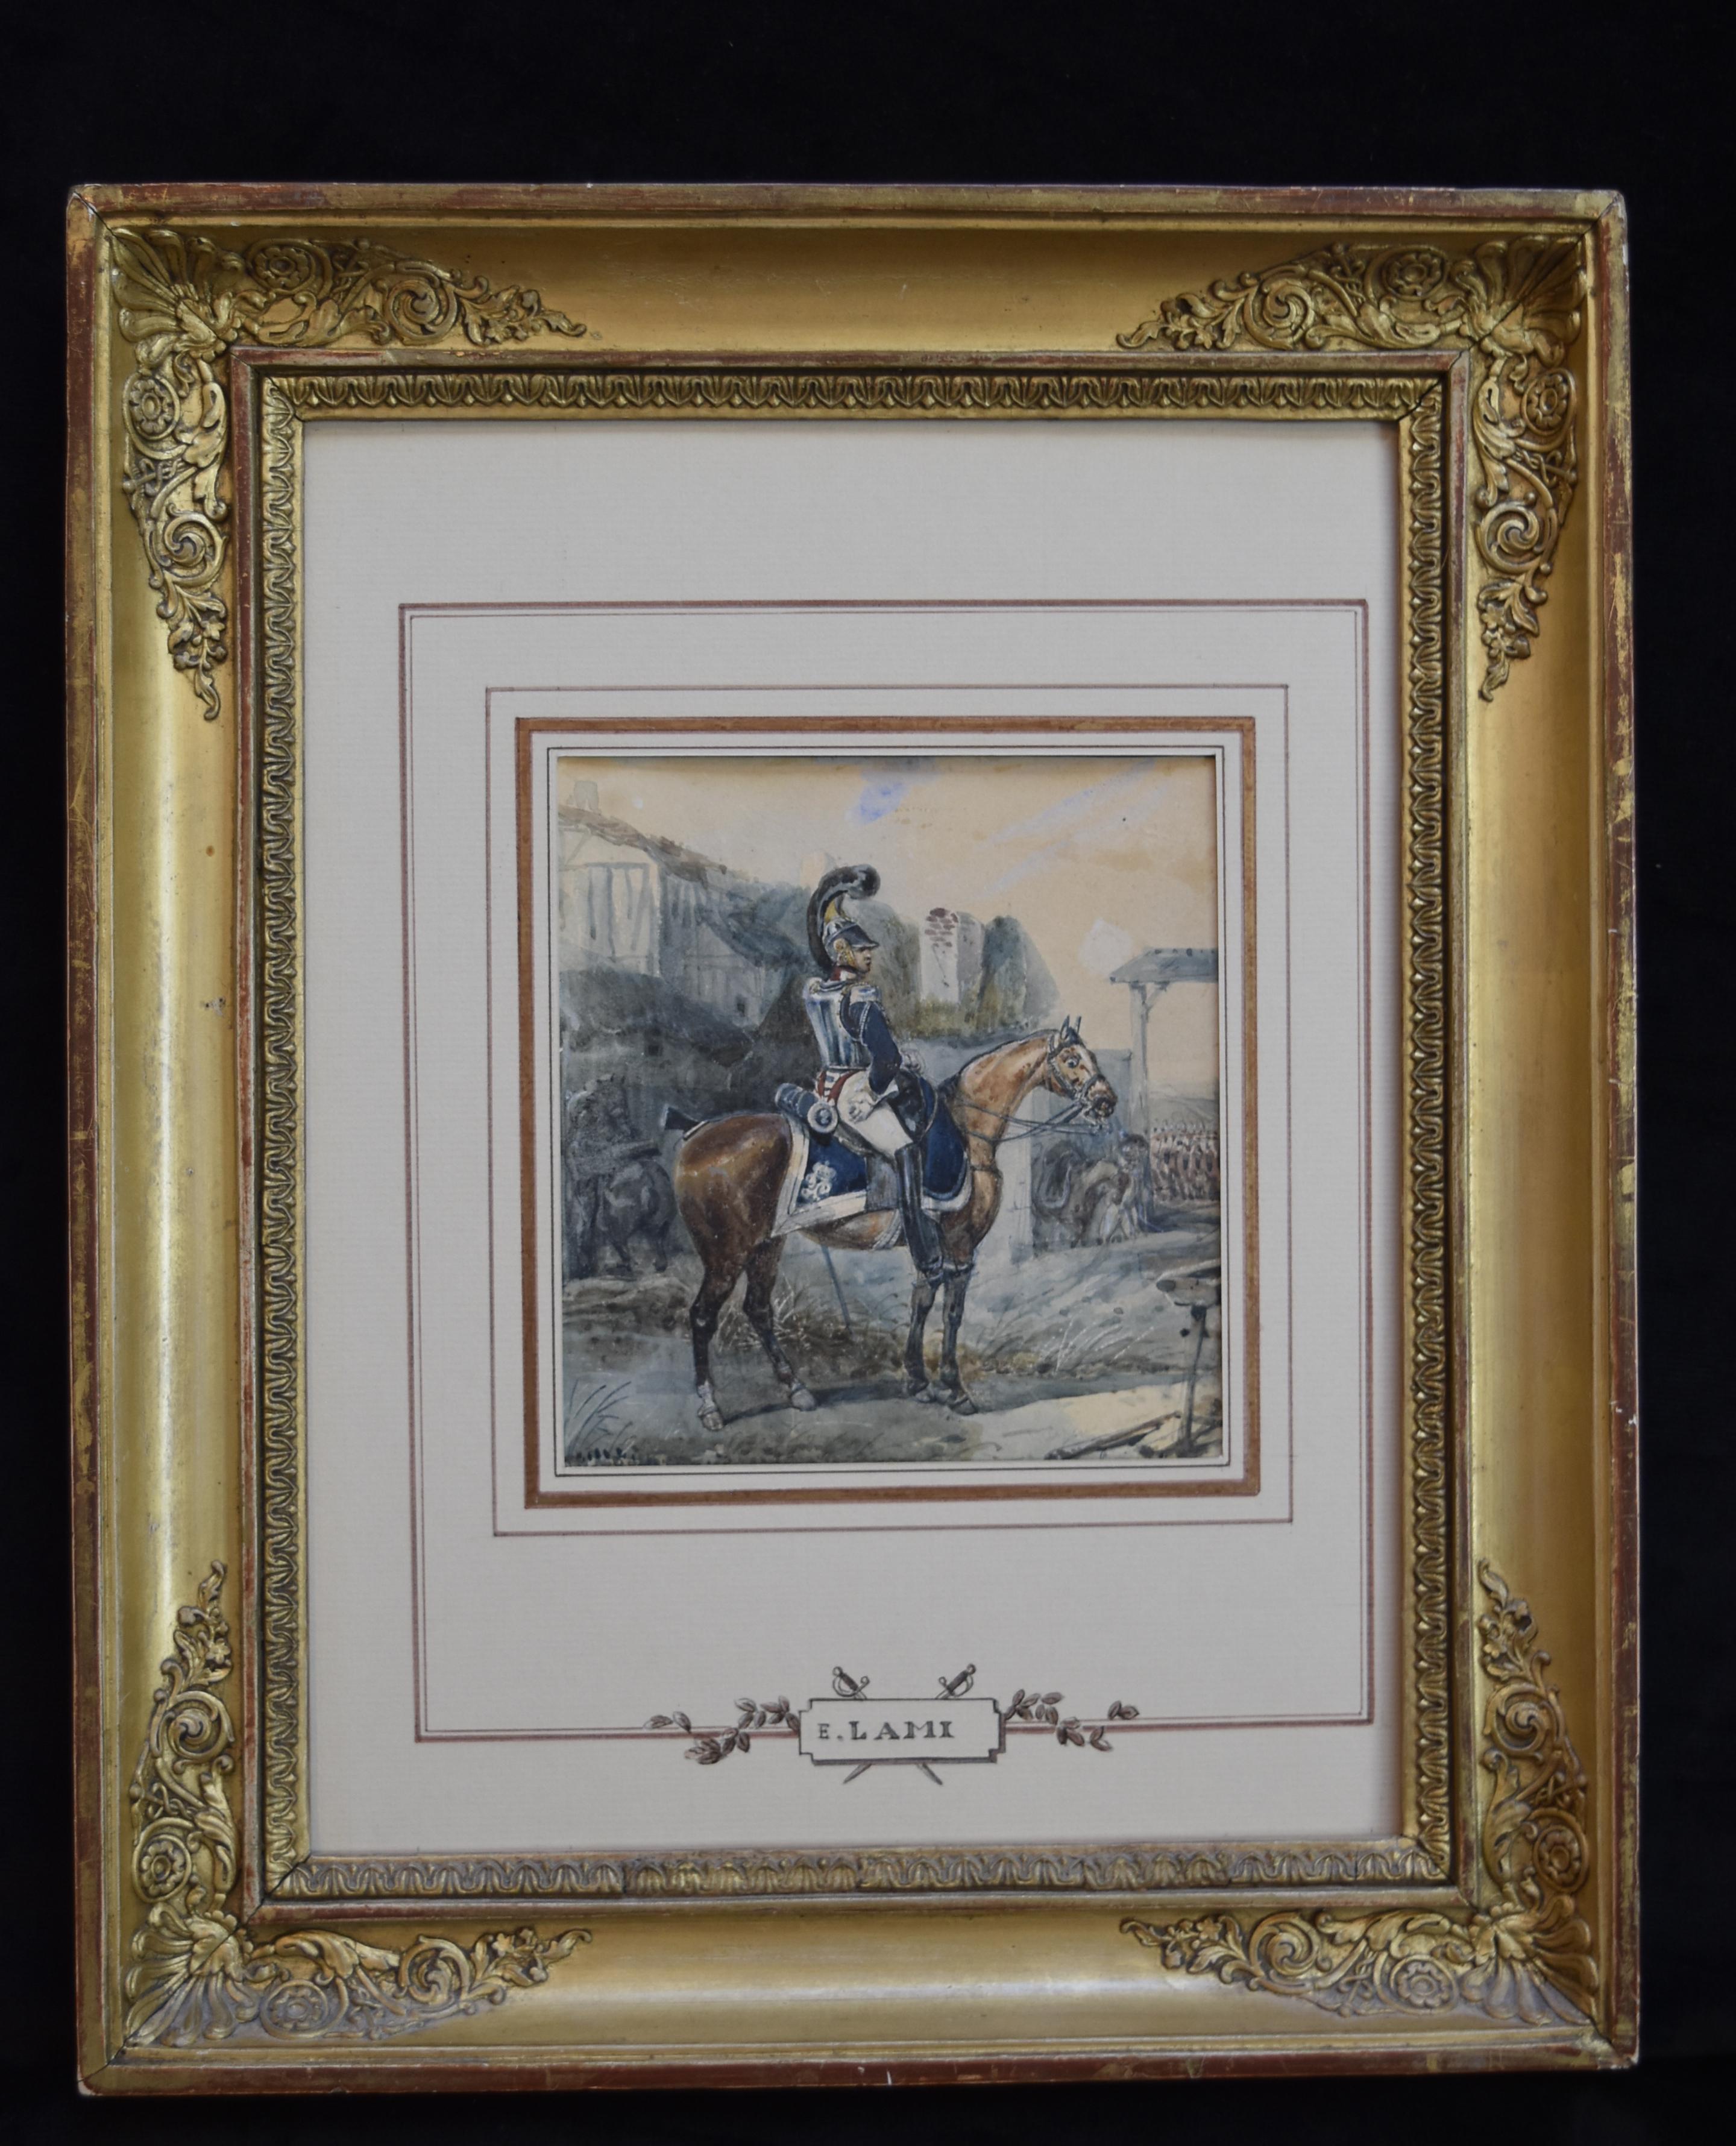 Attributed to Eugene Lami, a Hussar on his horse, watercolor - Art by Unknown